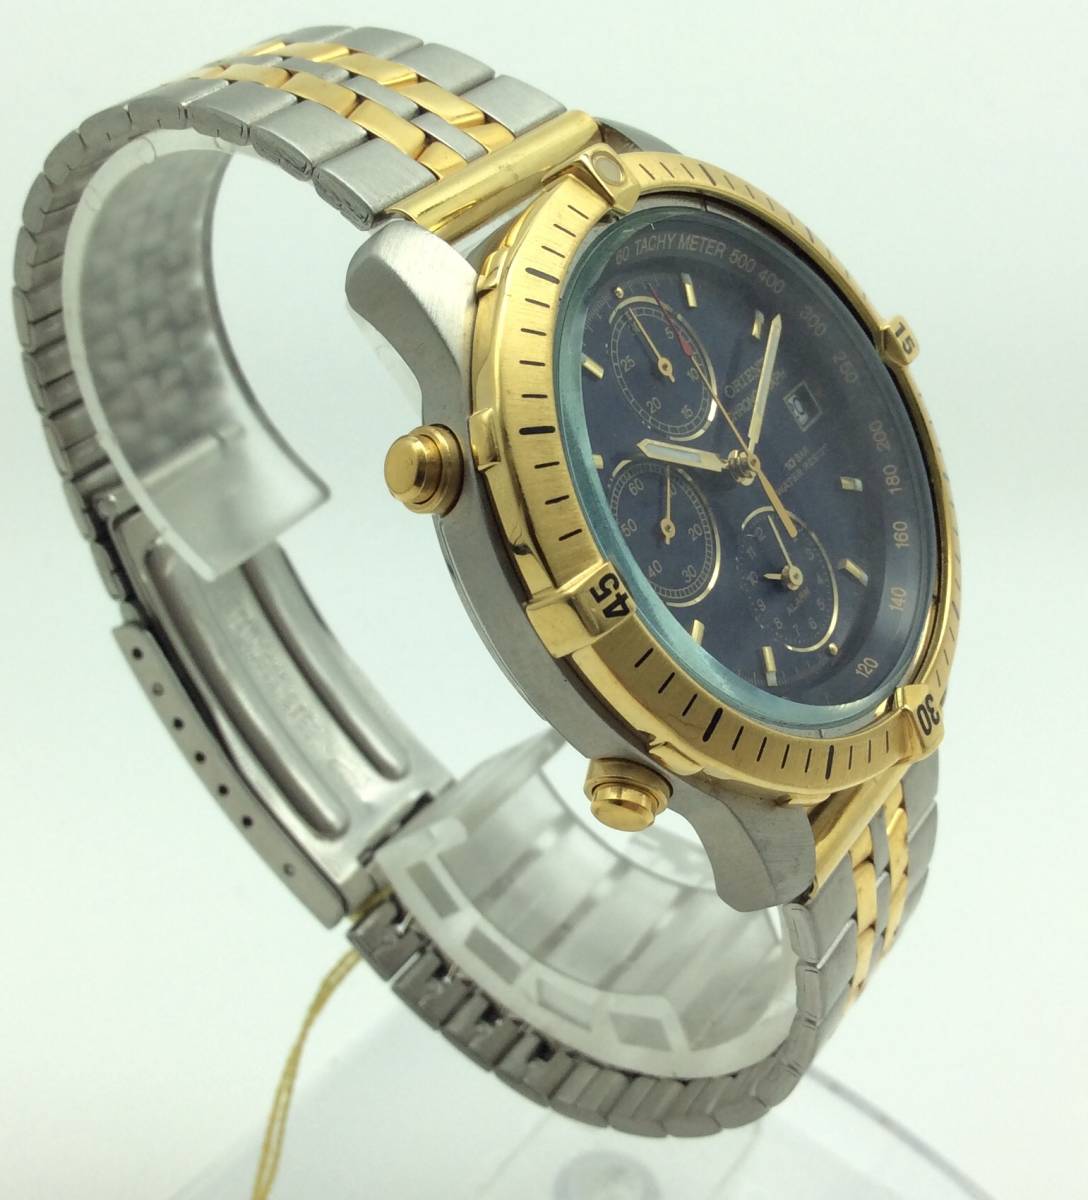 Orient-7T32-HFA001-70-Stainless+Gold-DarkBlueFace-WrongBracelet-YahooJapan-Nov2020-Another-2.jpg